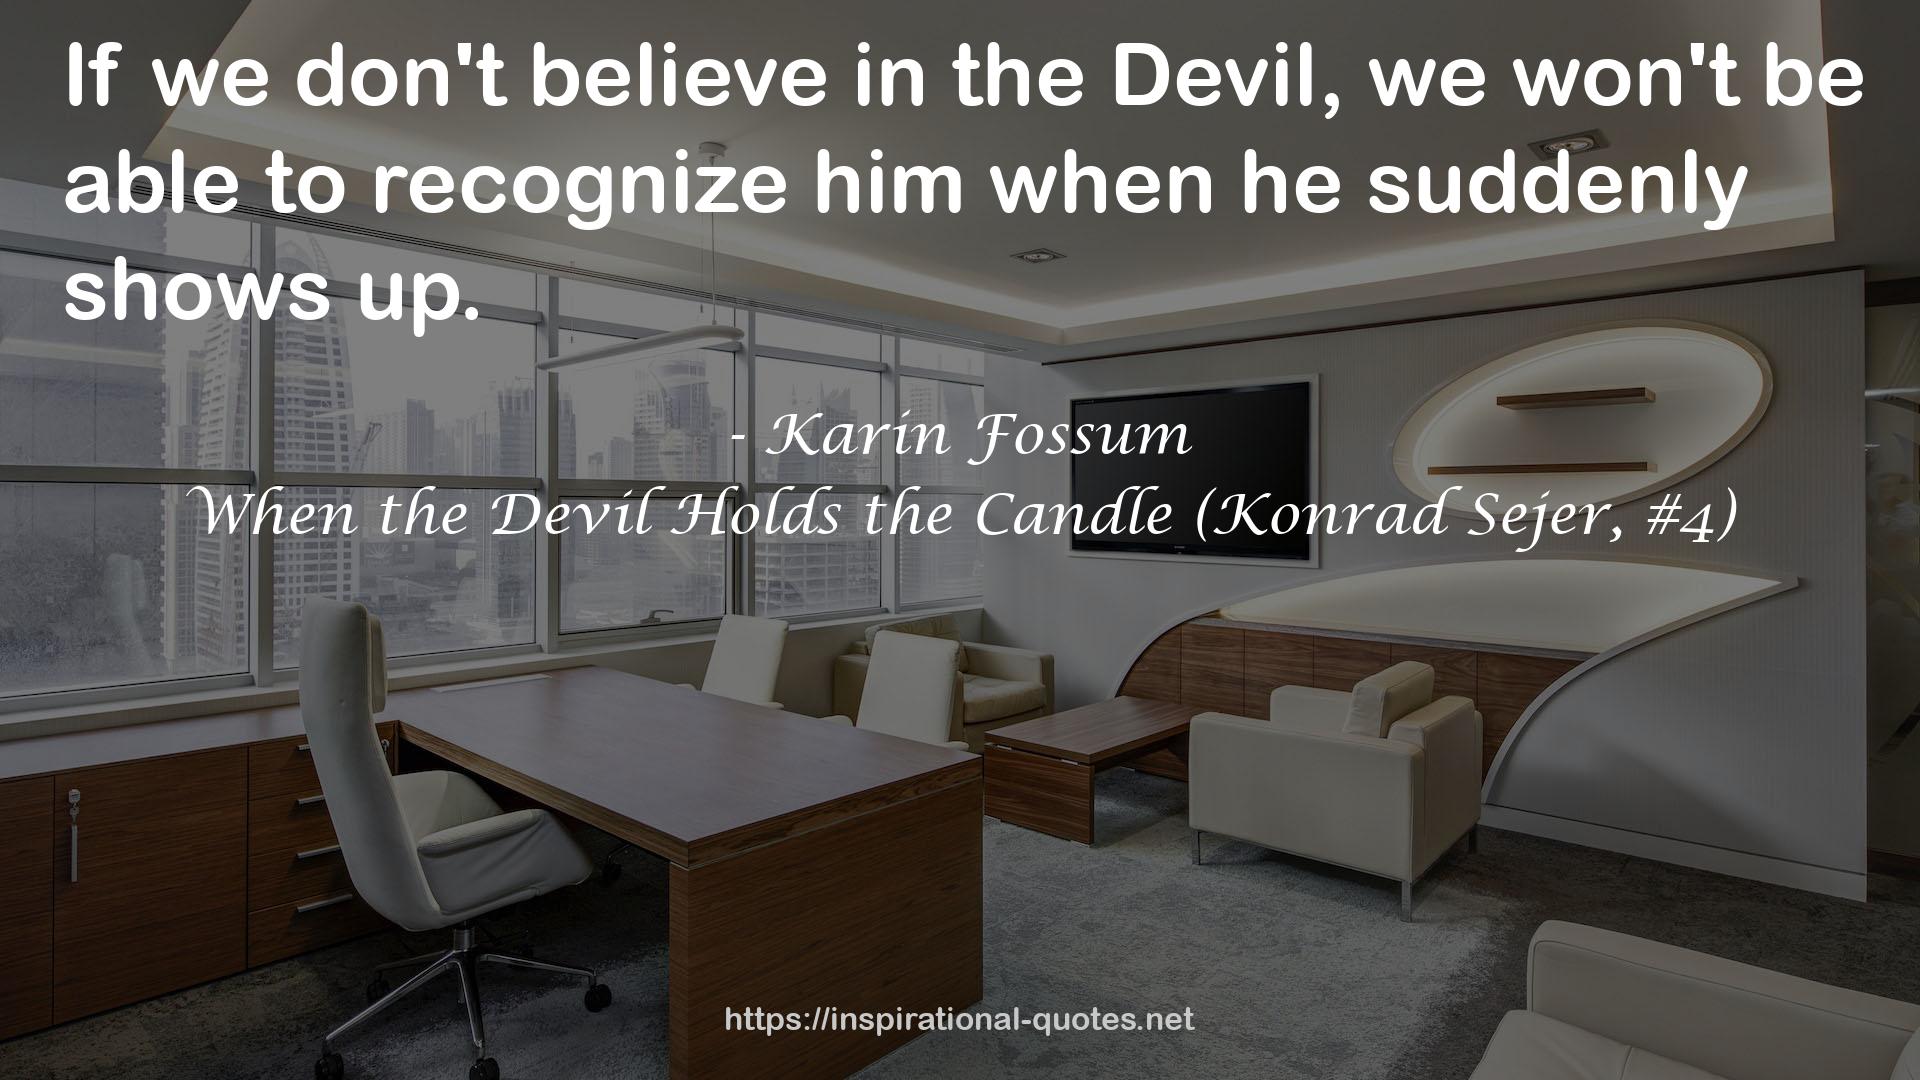 When the Devil Holds the Candle (Konrad Sejer, #4) QUOTES